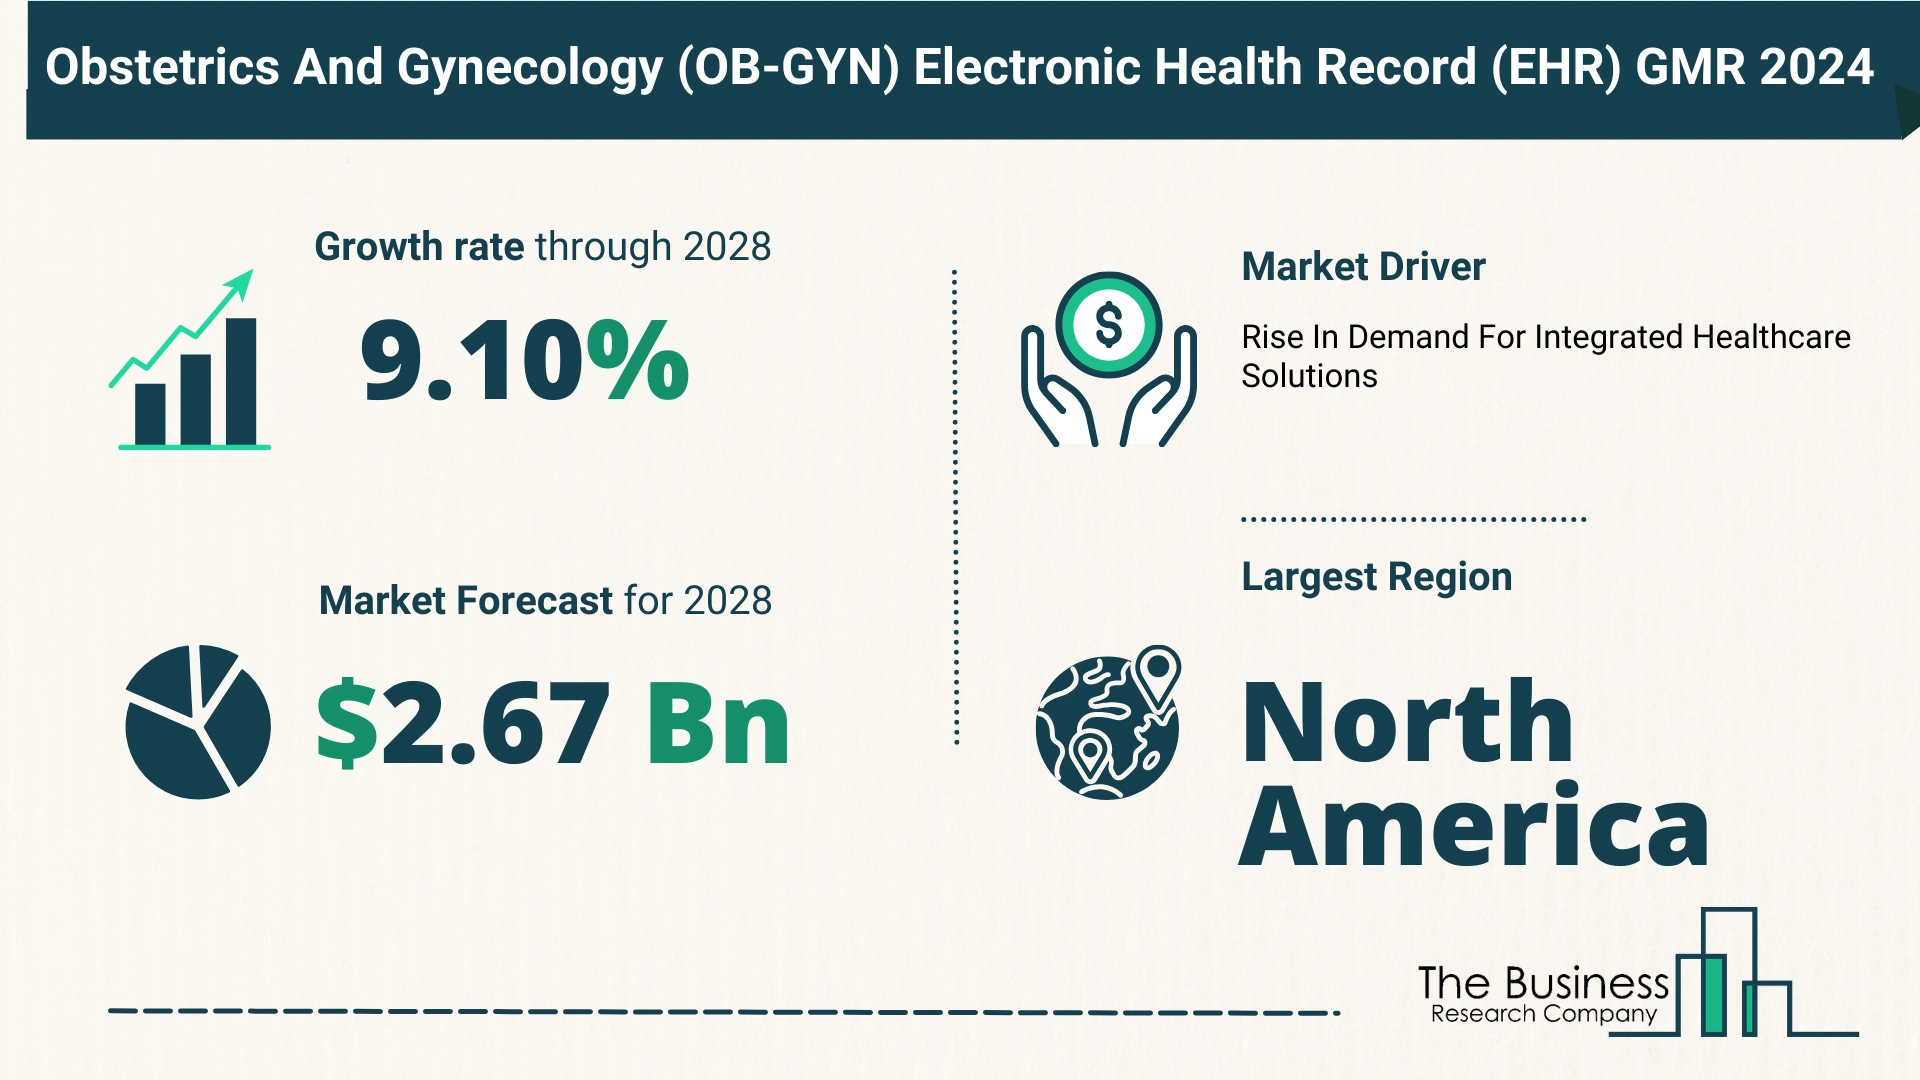 What Is The Forecast Growth Rate For The Obstetrics And Gynecology (OB-GYN) Electronic Health Record (EHR) Market?